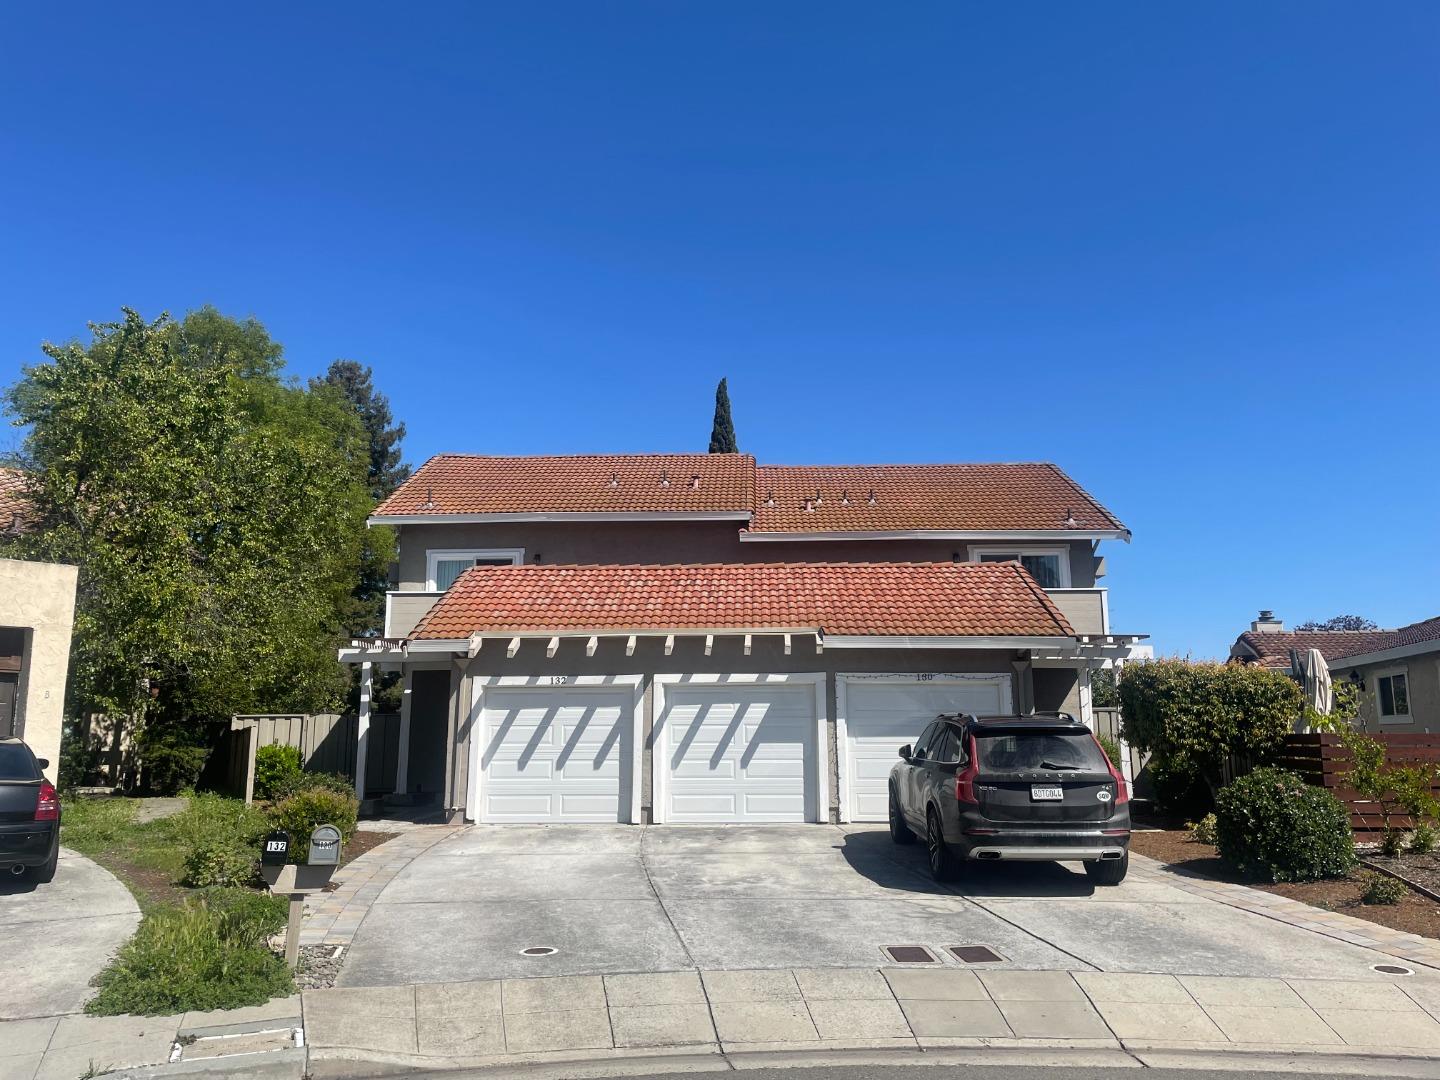 Photo of 130 Brenton Ct in Mountain View, CA